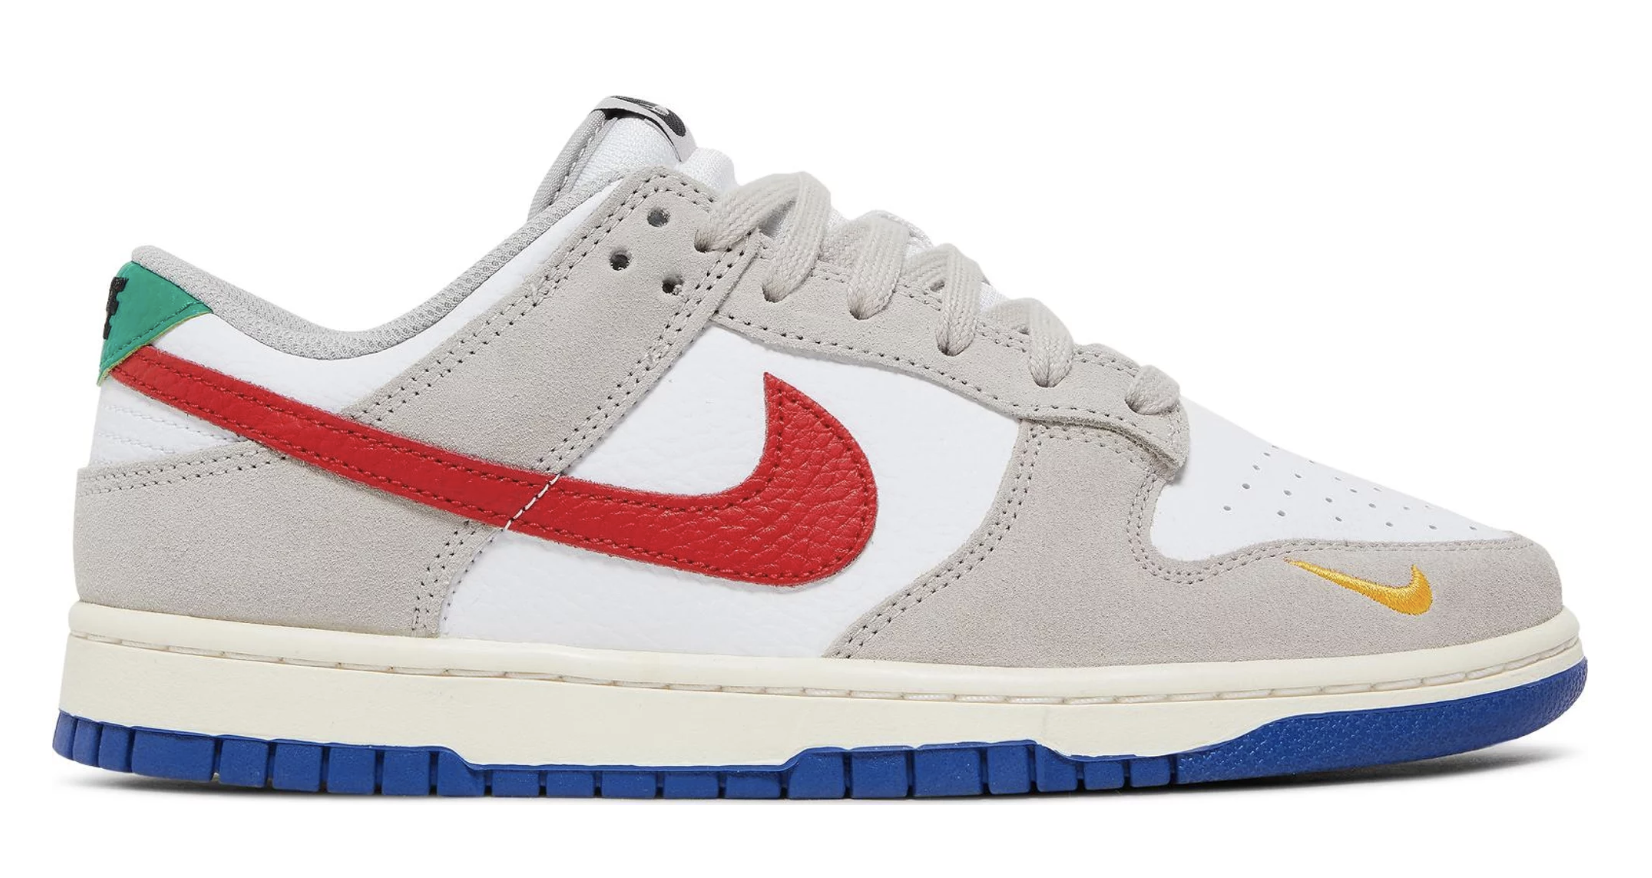 NIKE DUNK LOW LIGHT IRON ORE RED BLUE